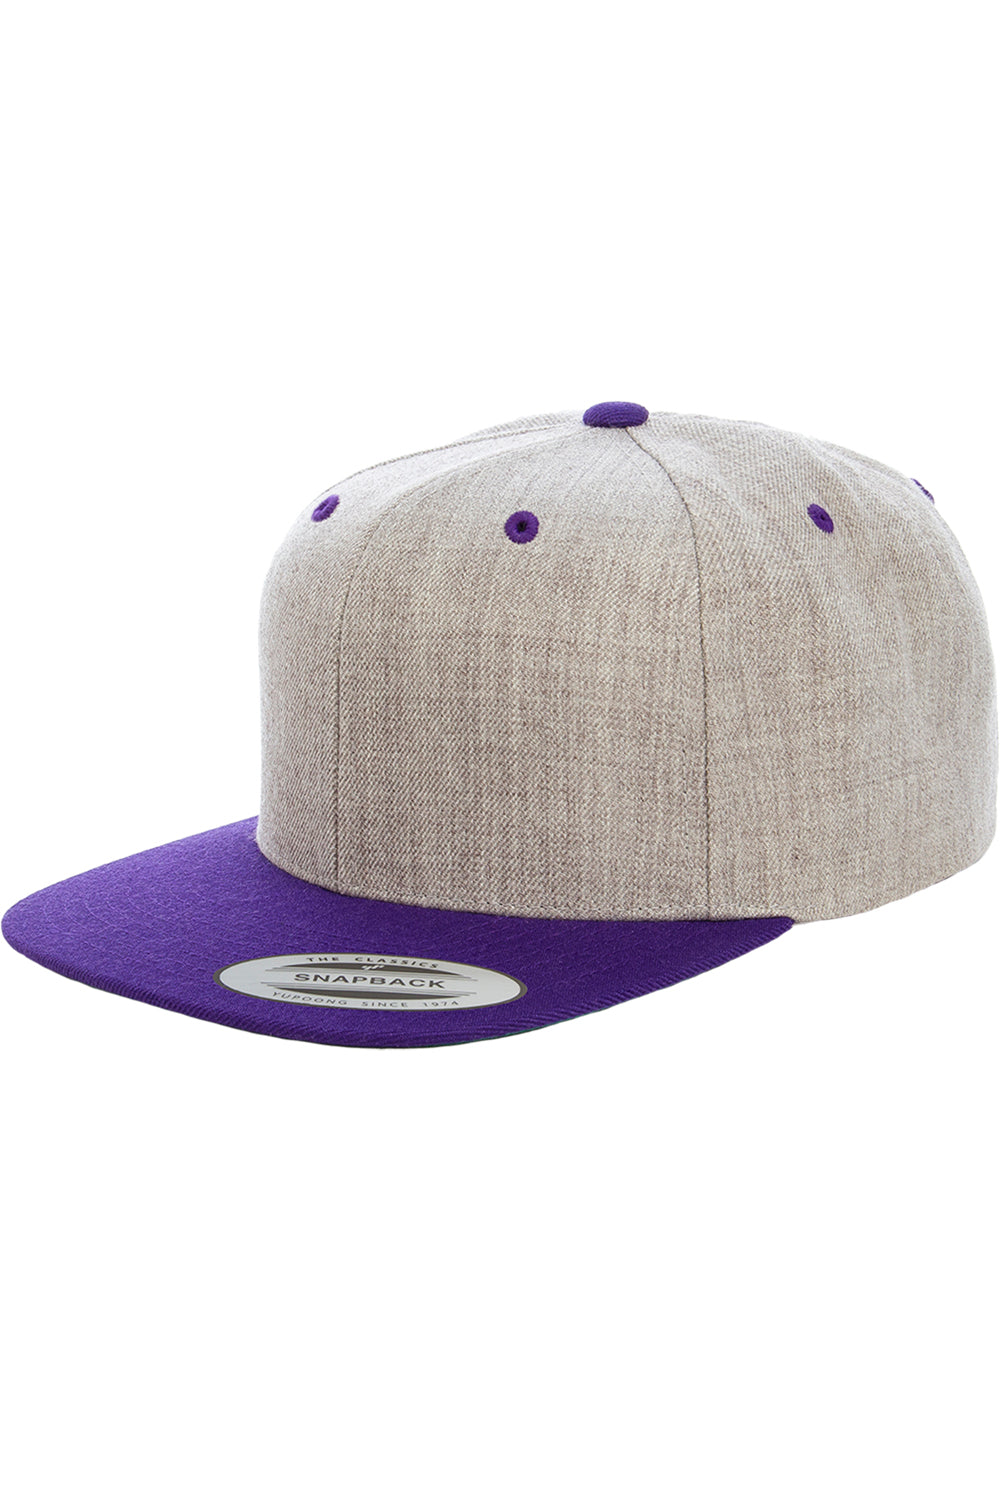 Yupoong 6089MT Mens Adjustable Hat Heather Grey/Purple Front